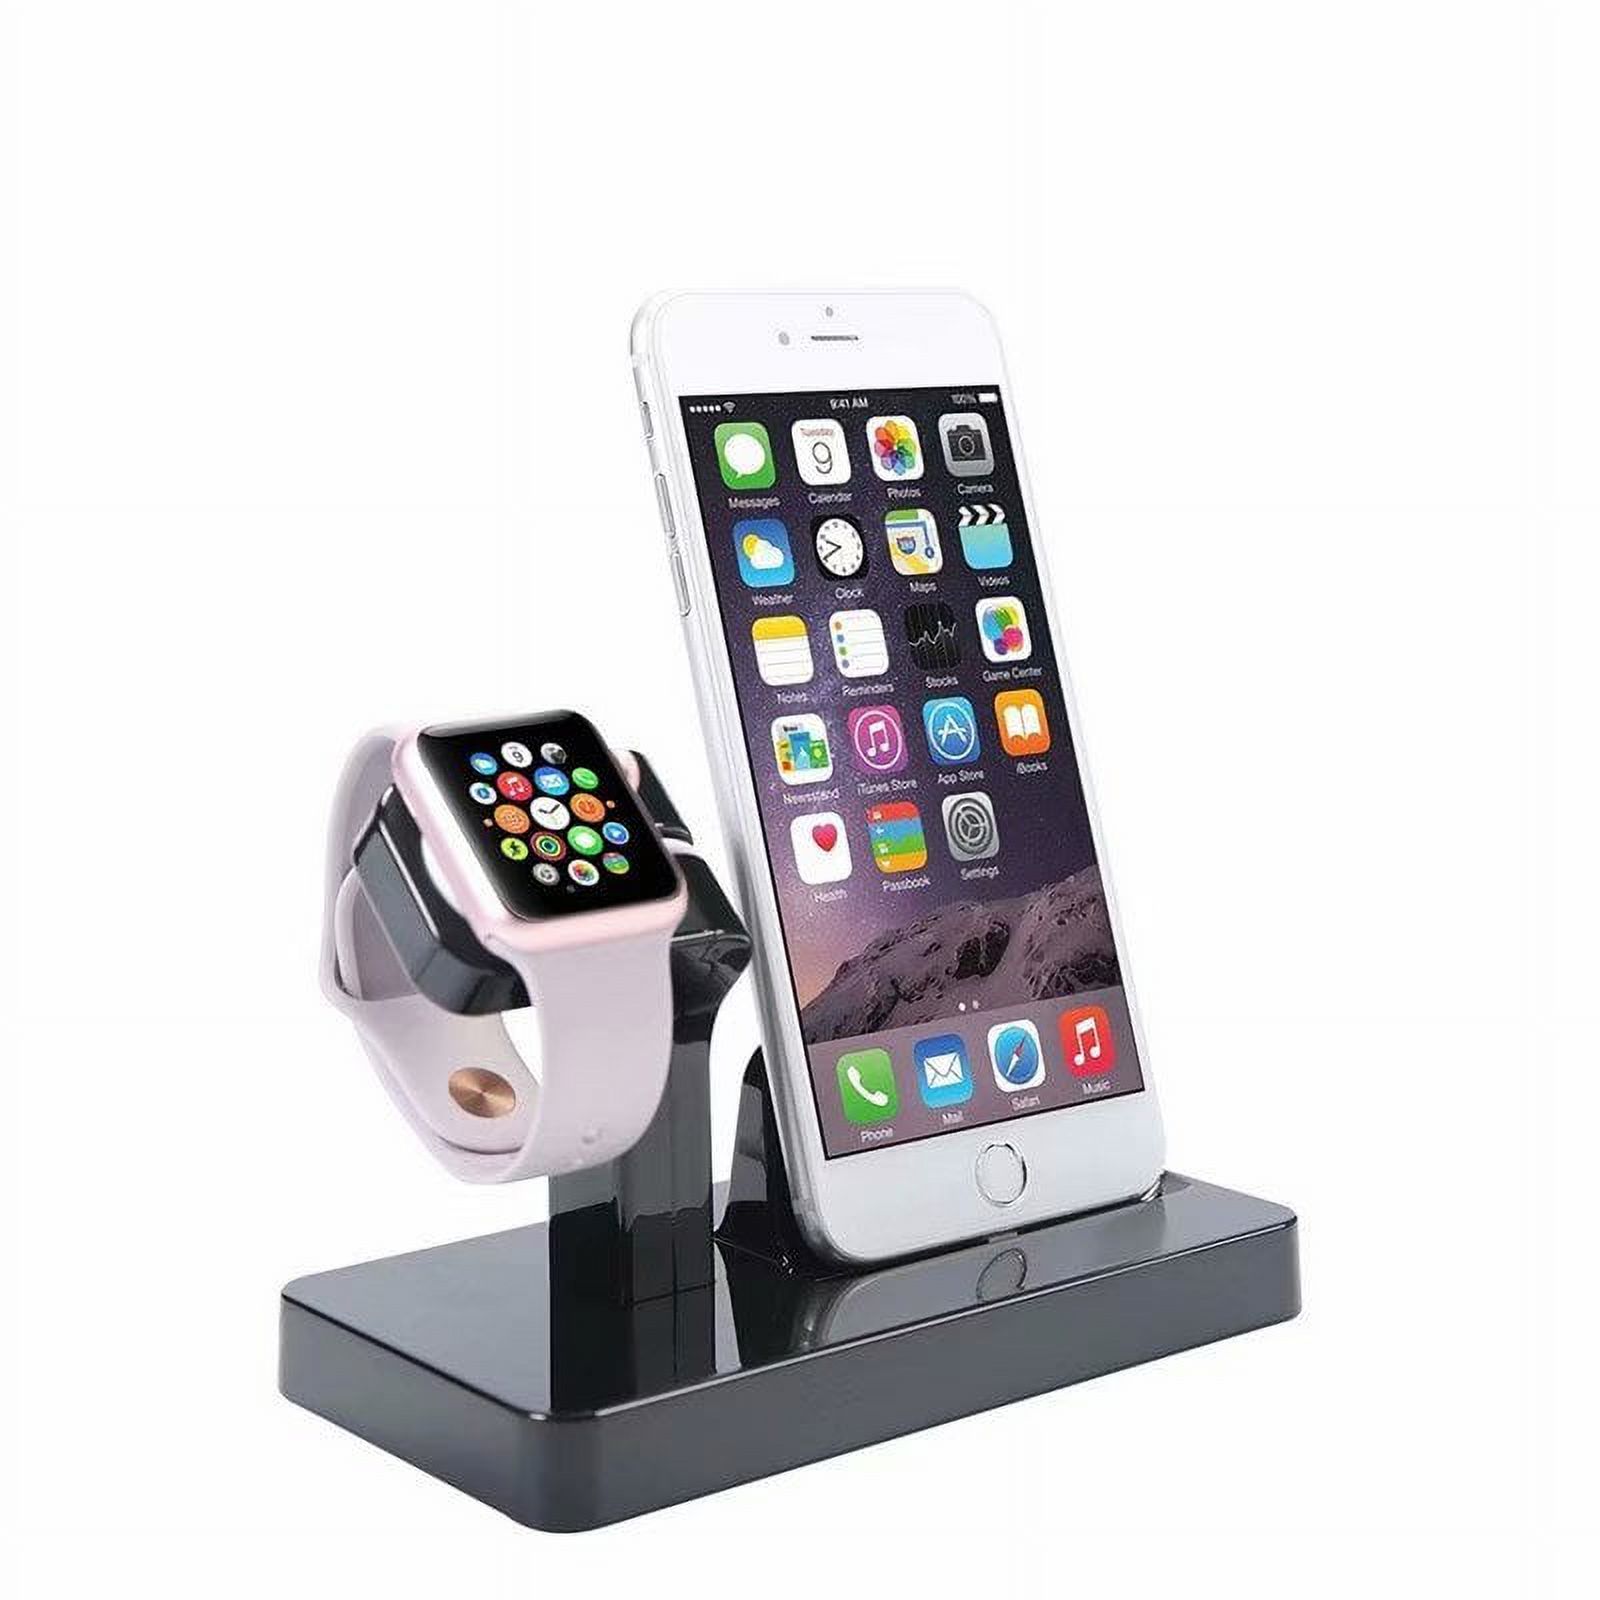 Charging dock,2 in 1 Stand Holder & Charging Docking Station, Charger Stand Dock Compatible with Apple Watch Series 3 2 1, iWatch, iPhone, iPod -Black - image 3 of 8